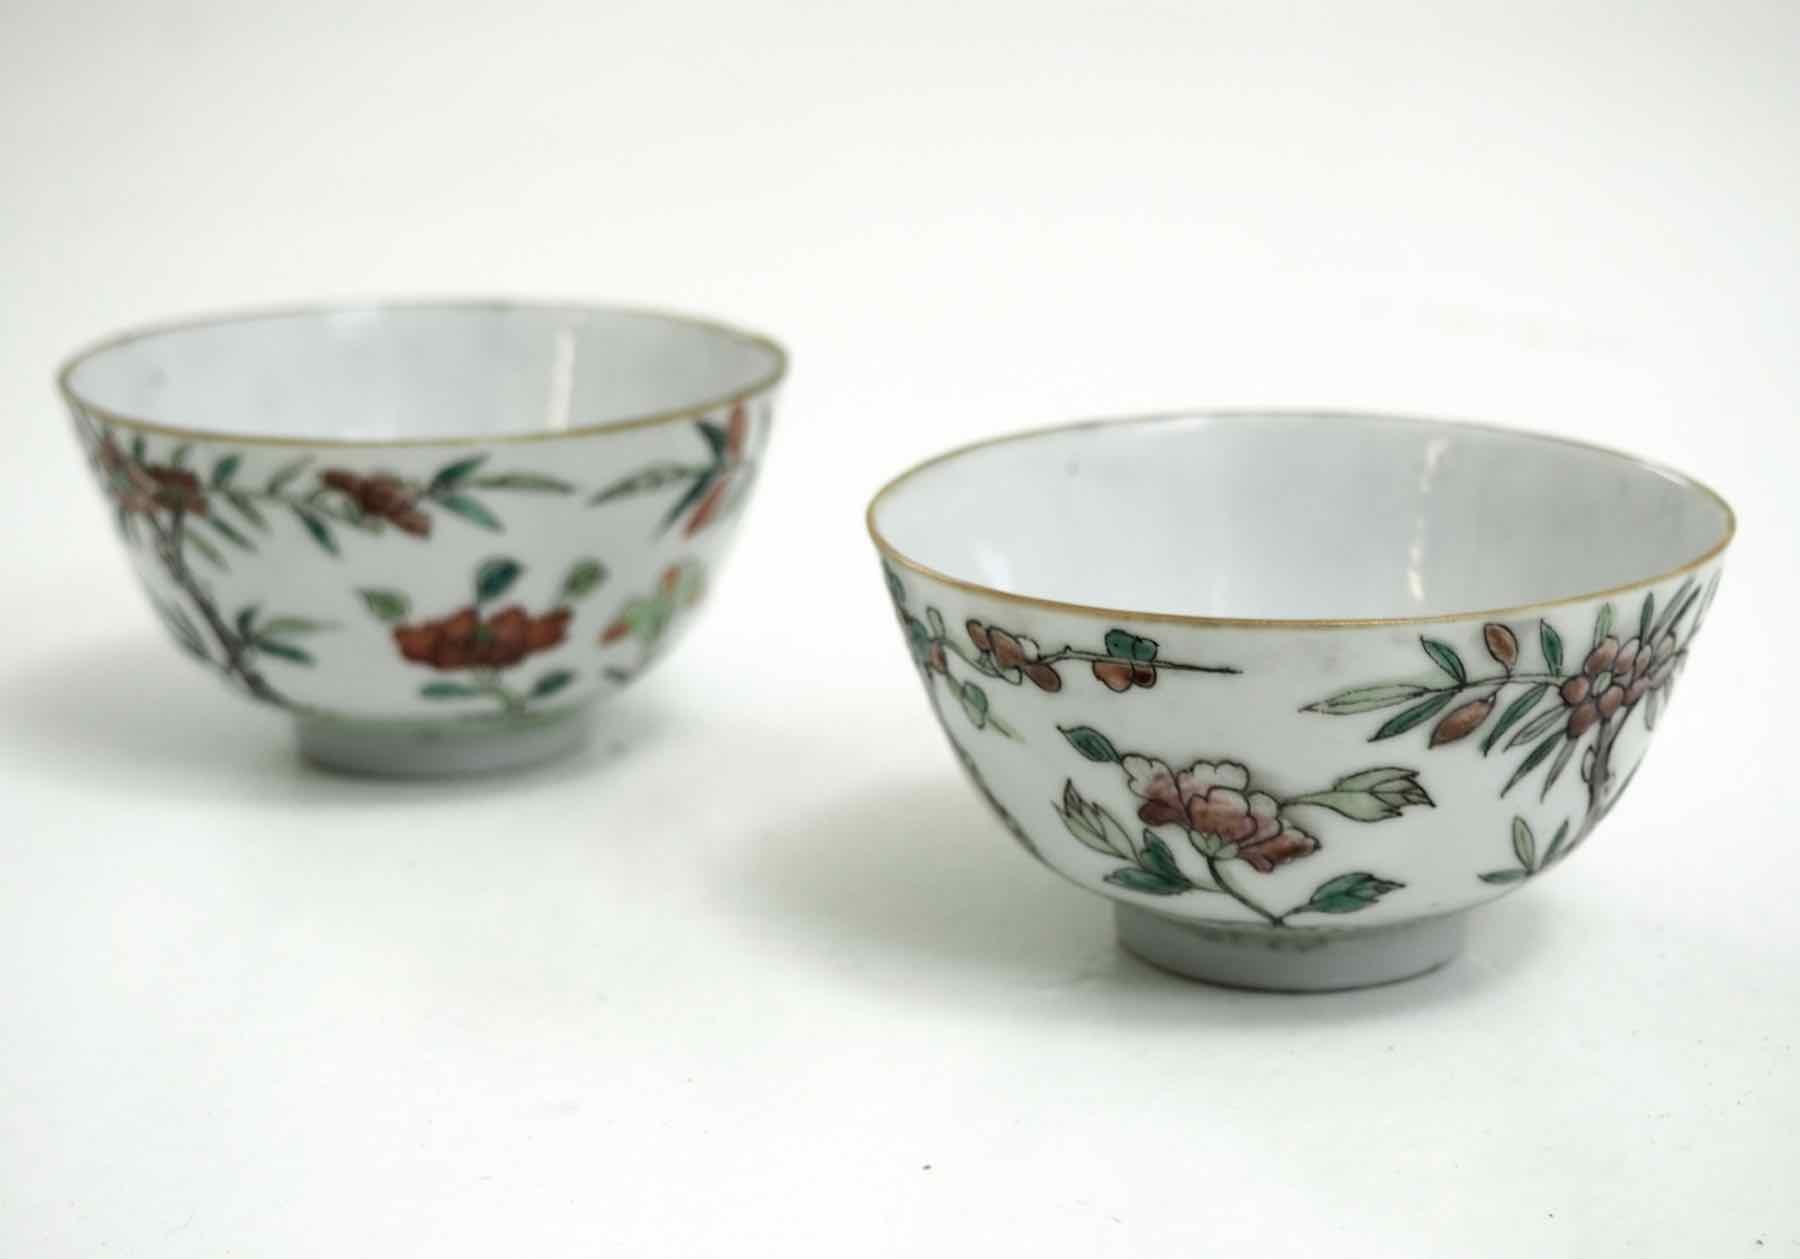 Pair of Chinese soups bowls, 18th century.